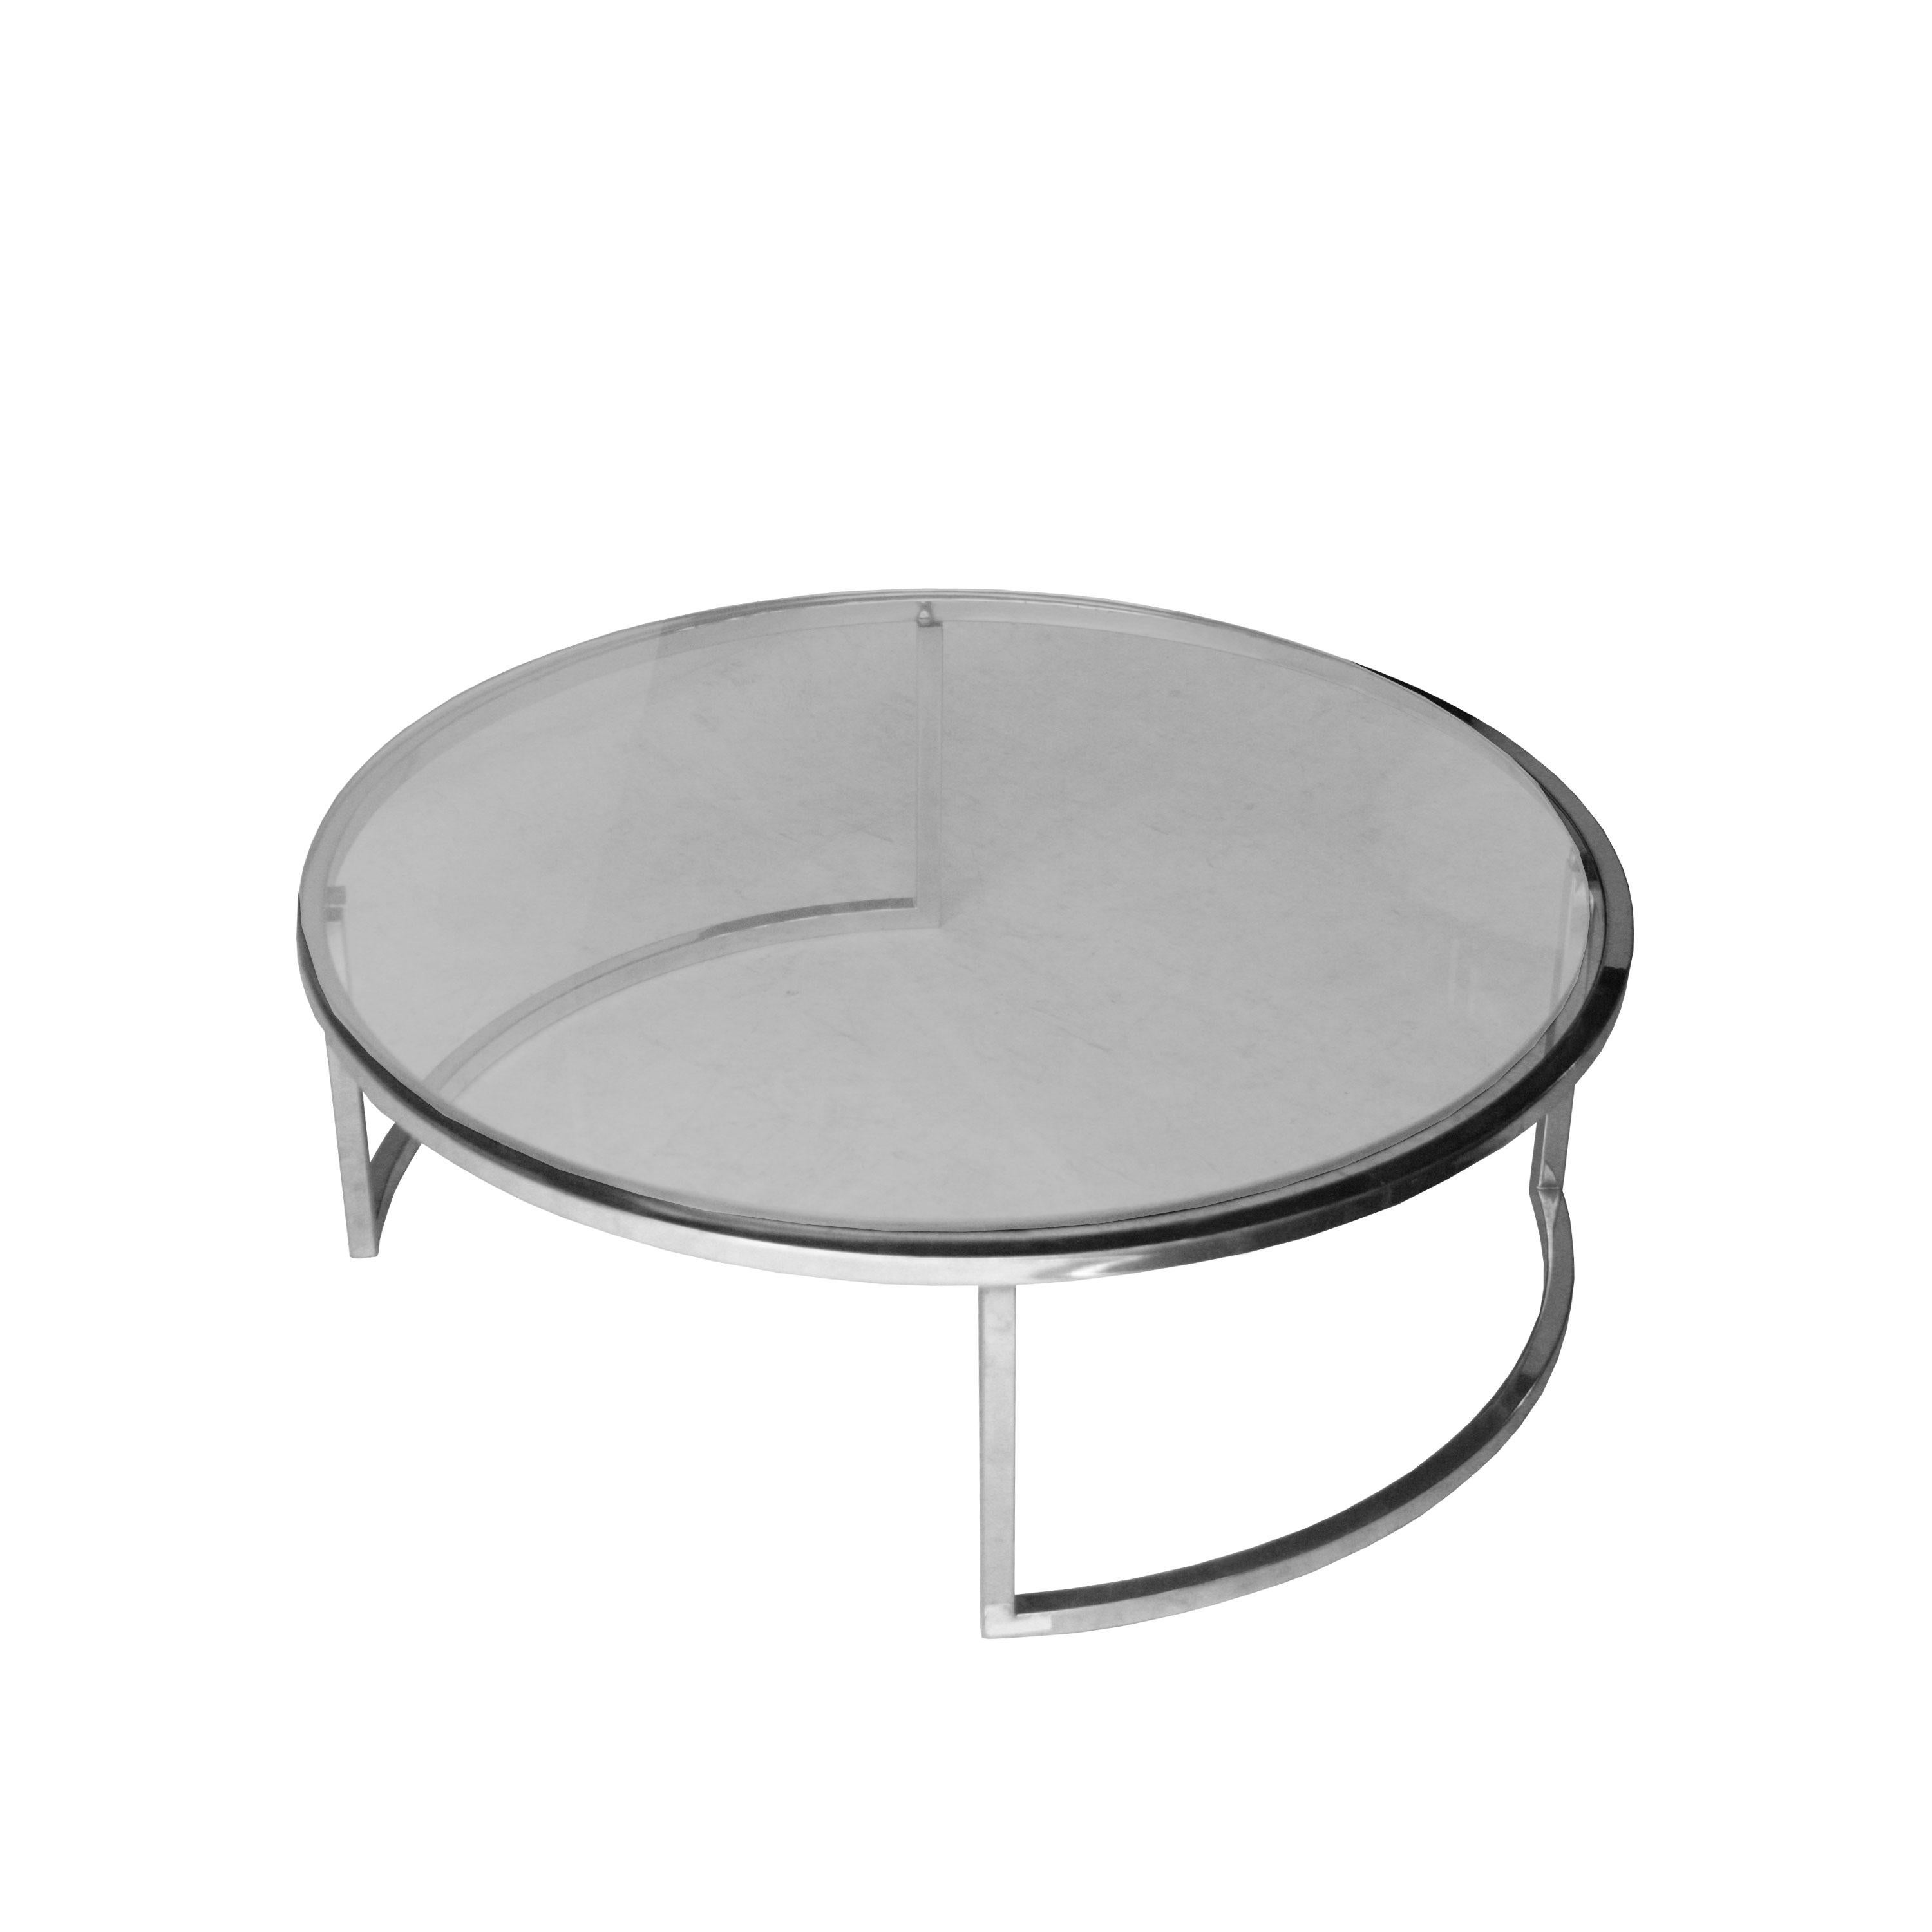 Circular coffee/center table with structure in chromed steel and glass top.